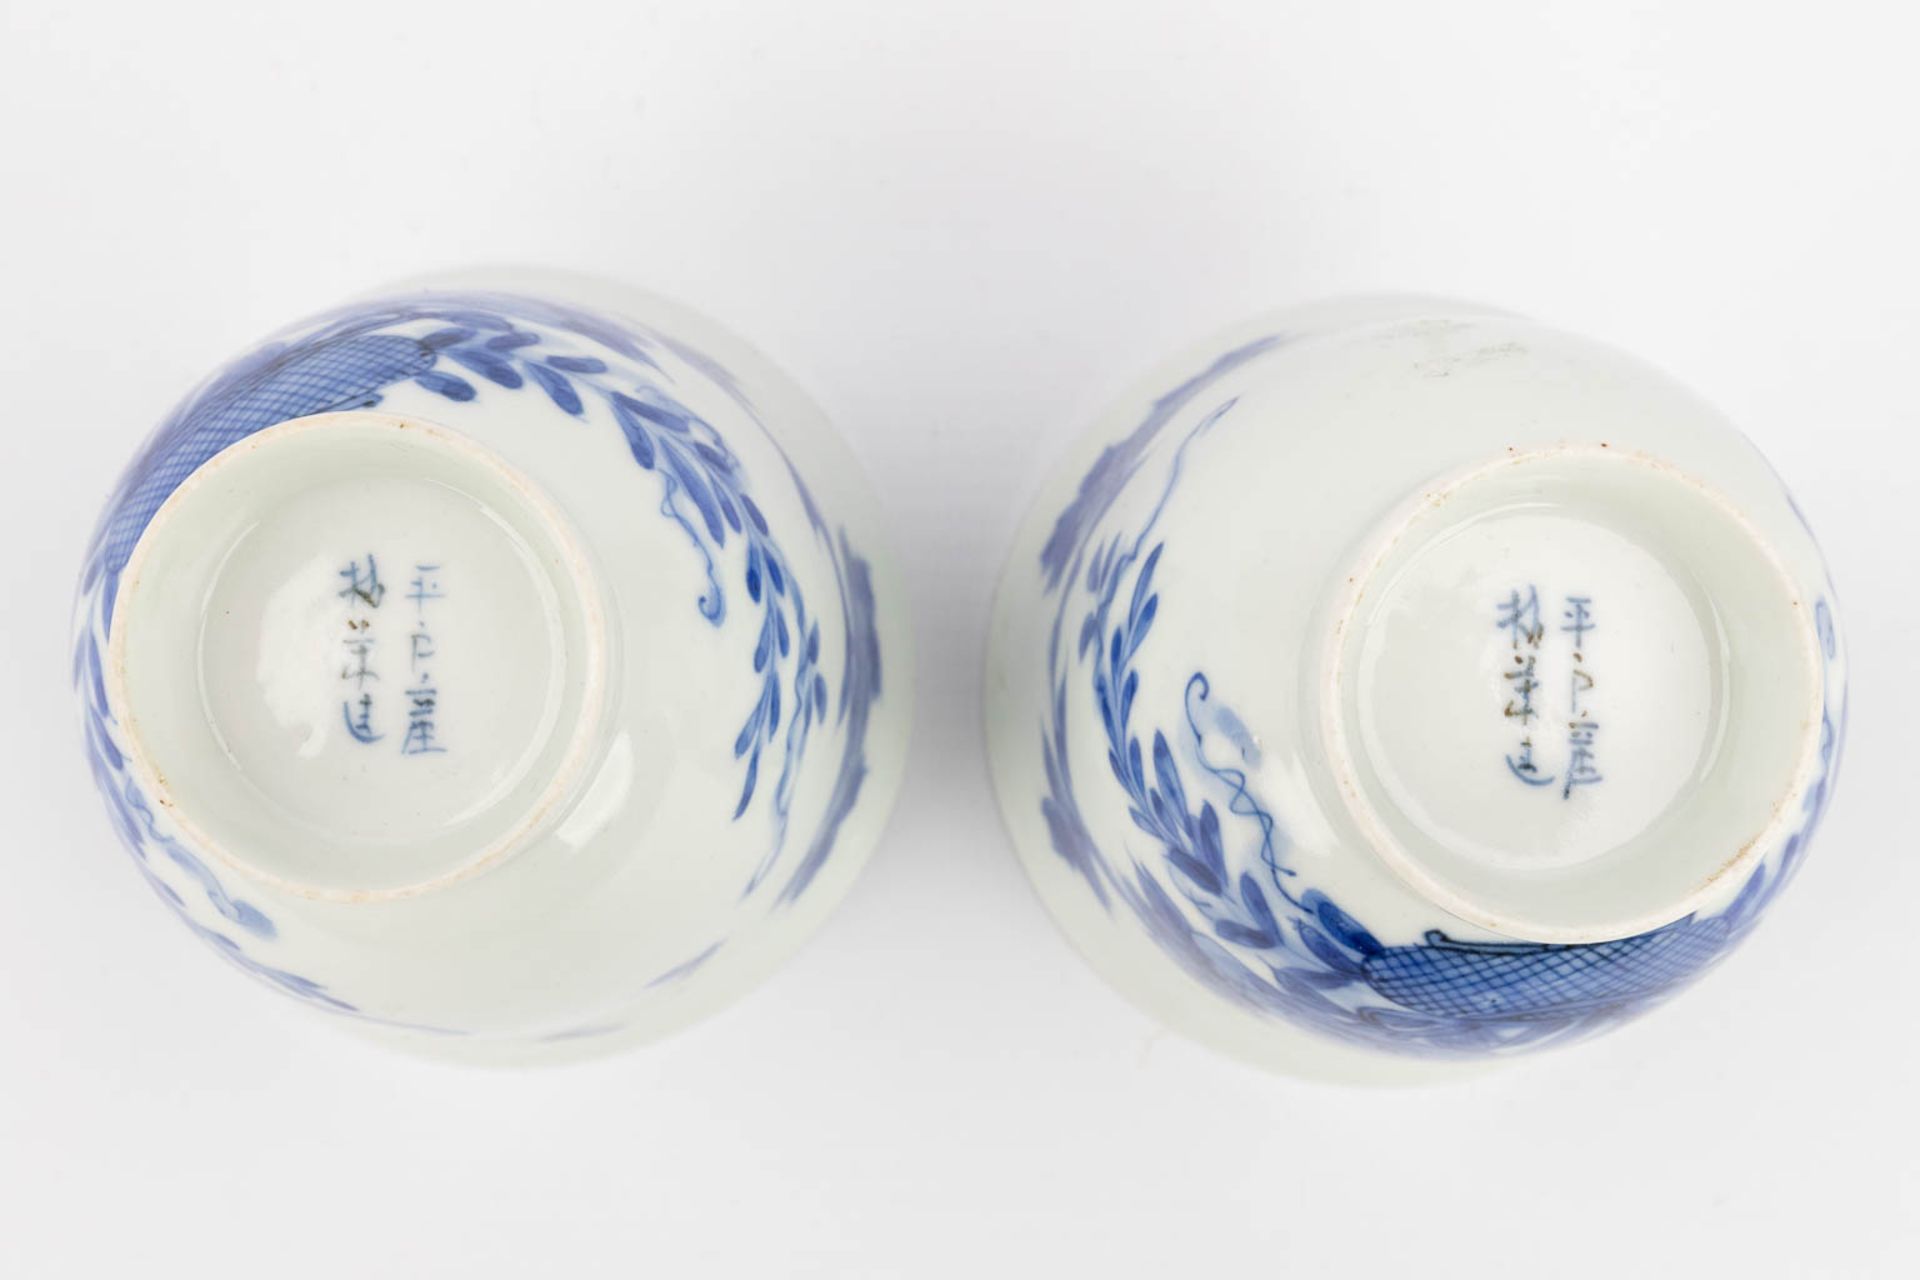 A large collection of bowls and saucers, eggshell porcelain, Japan, 20th C. (H:9 x D:9 cm) - Image 14 of 24